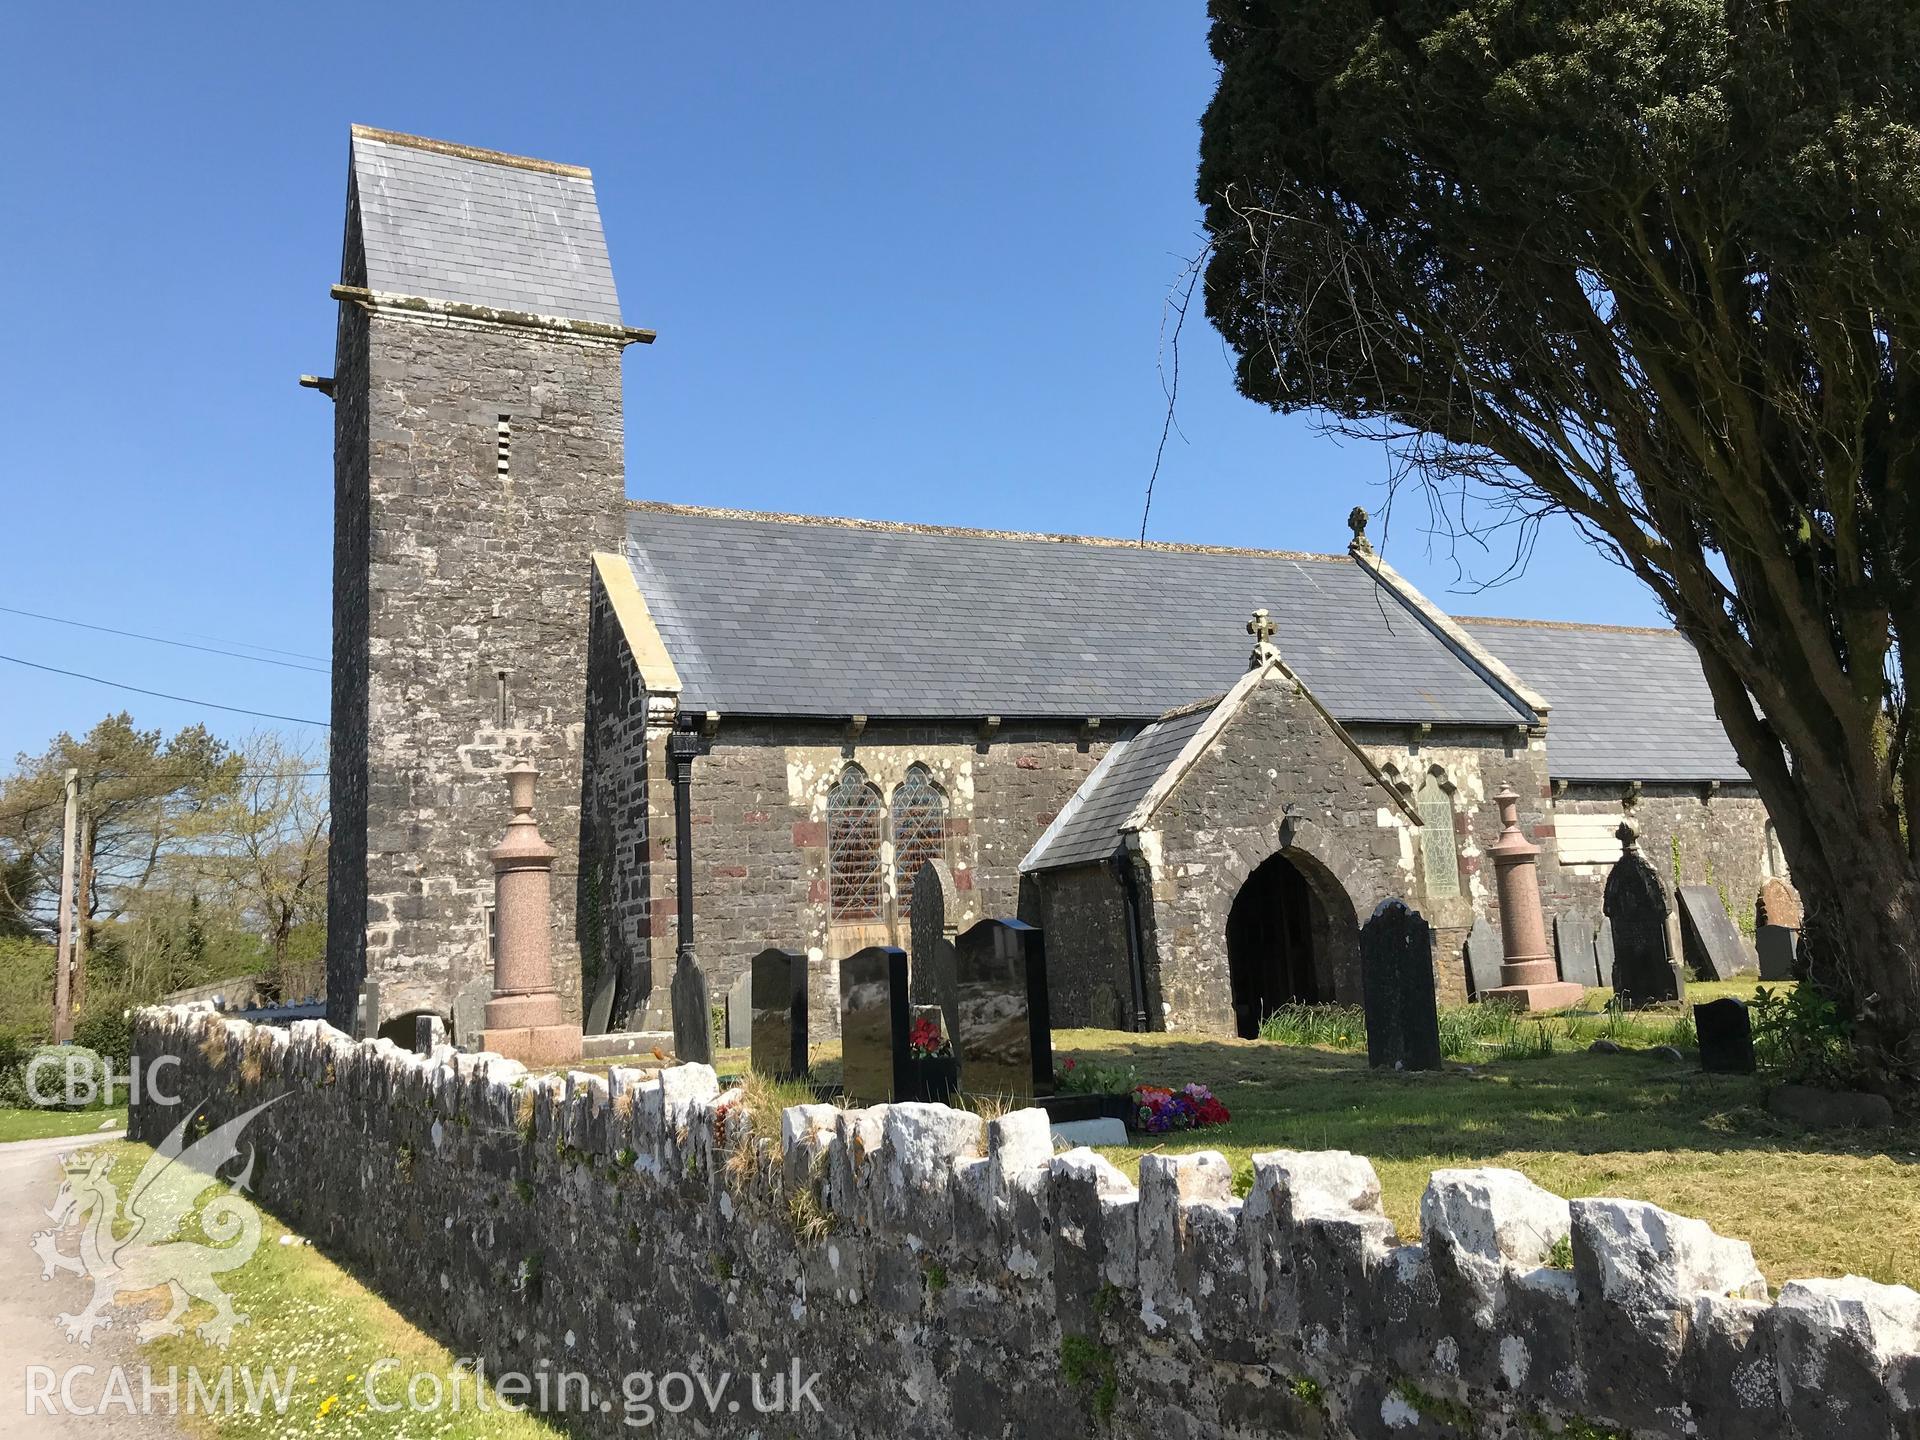 Colour photo showing exterior view of St. Margaret Marlos or St. Teilo's church and graveyard, Pendine, taken by Paul R. Davis, 6th May 2018.